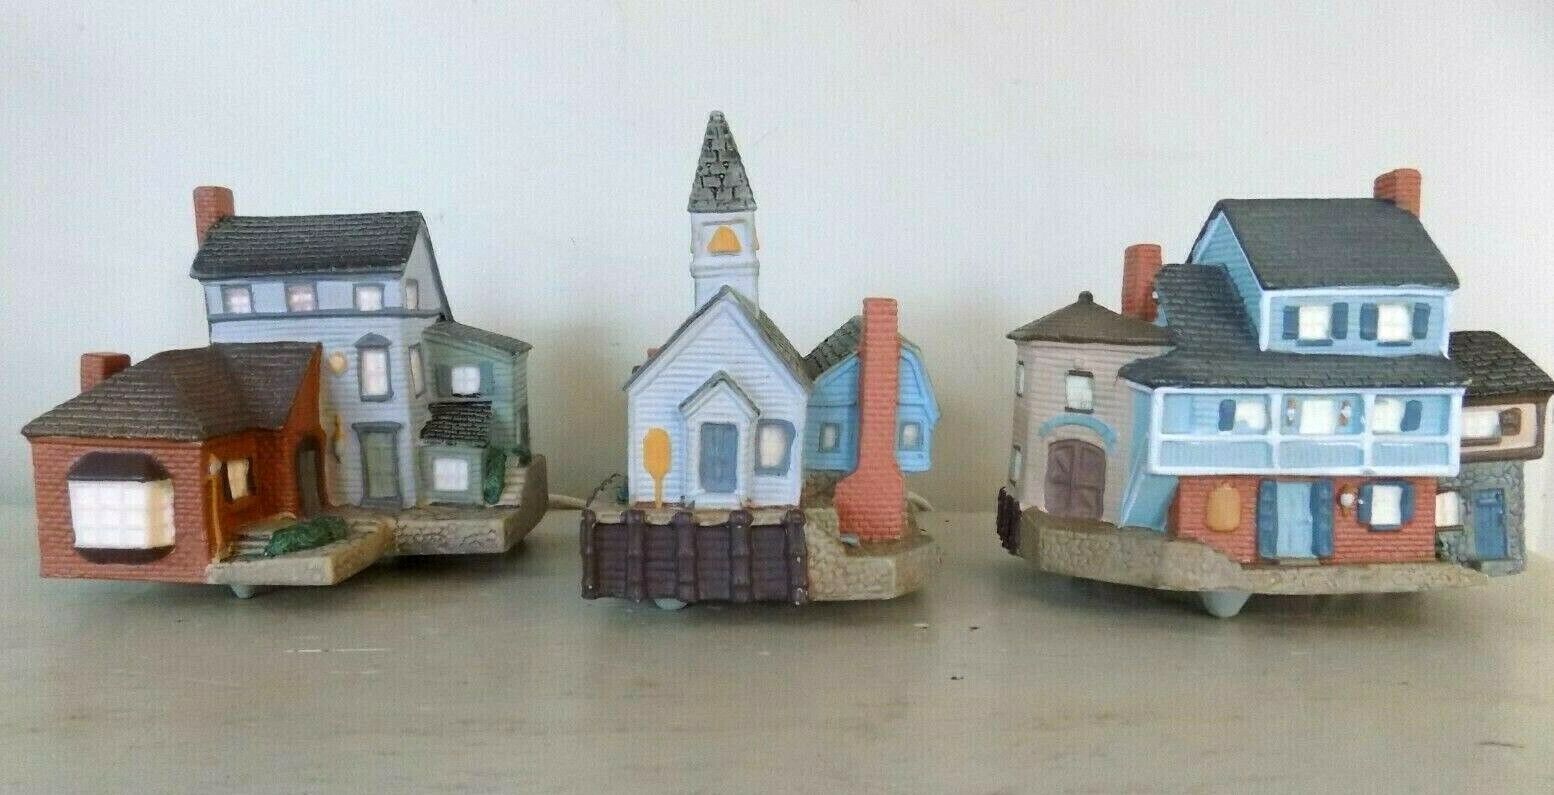 Lot 3 Avon Early American Light Up Village Church Main and Mill House Vintage